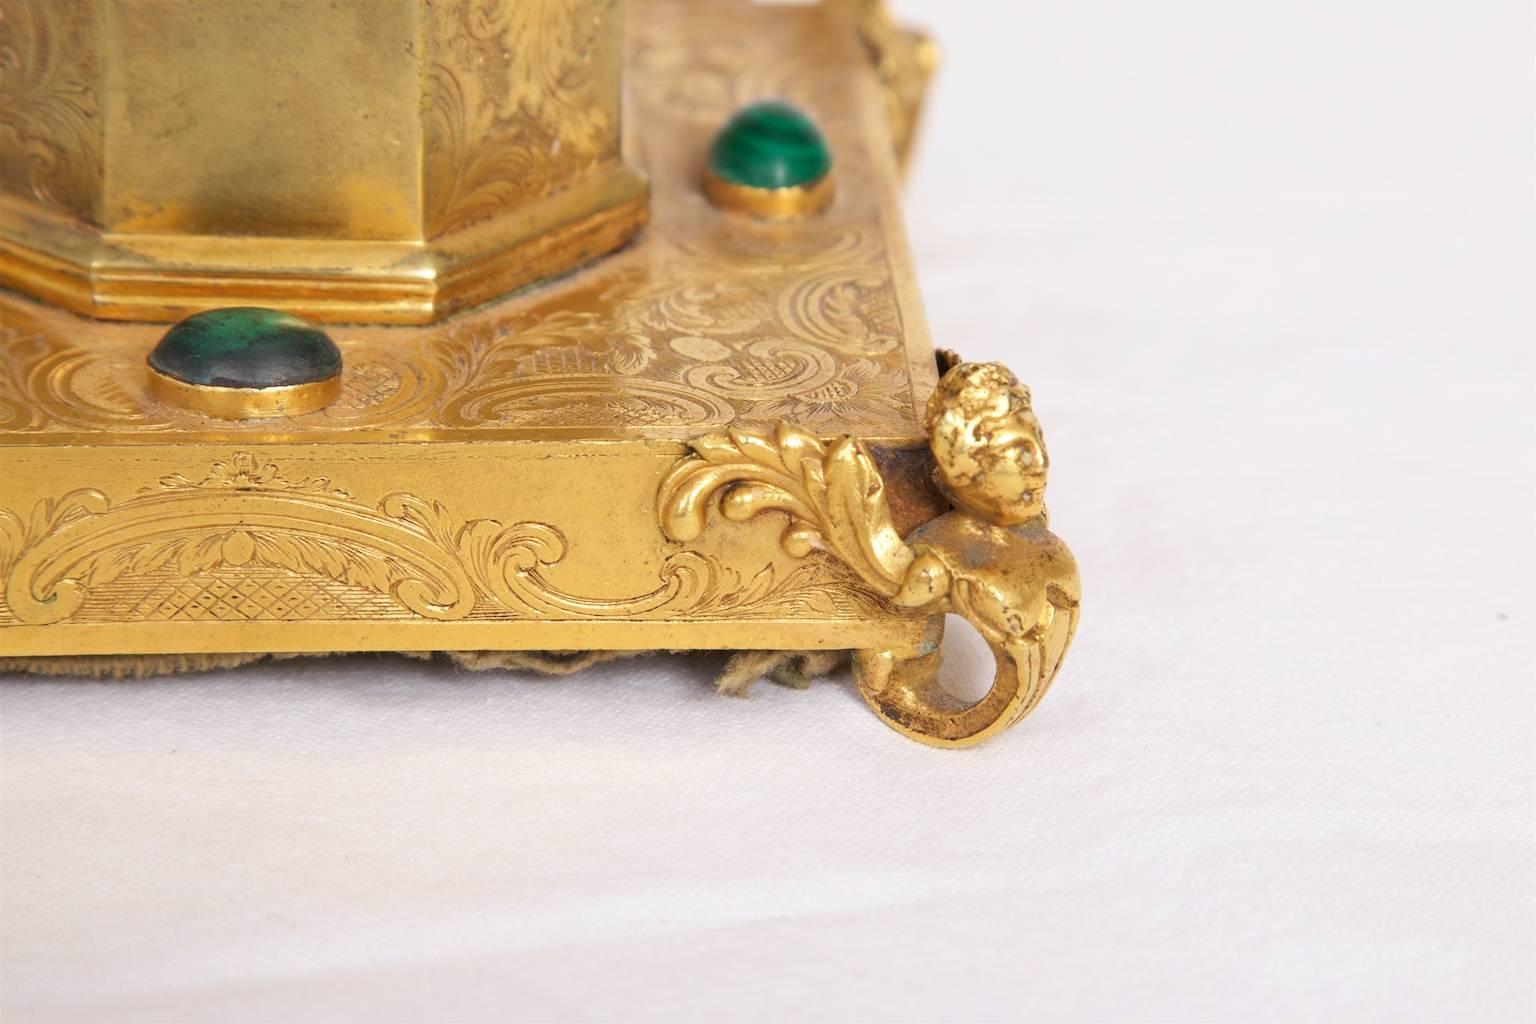 Inkwell gilt brass, with malachite inlay, 1850s Russian. Missing ink glass.